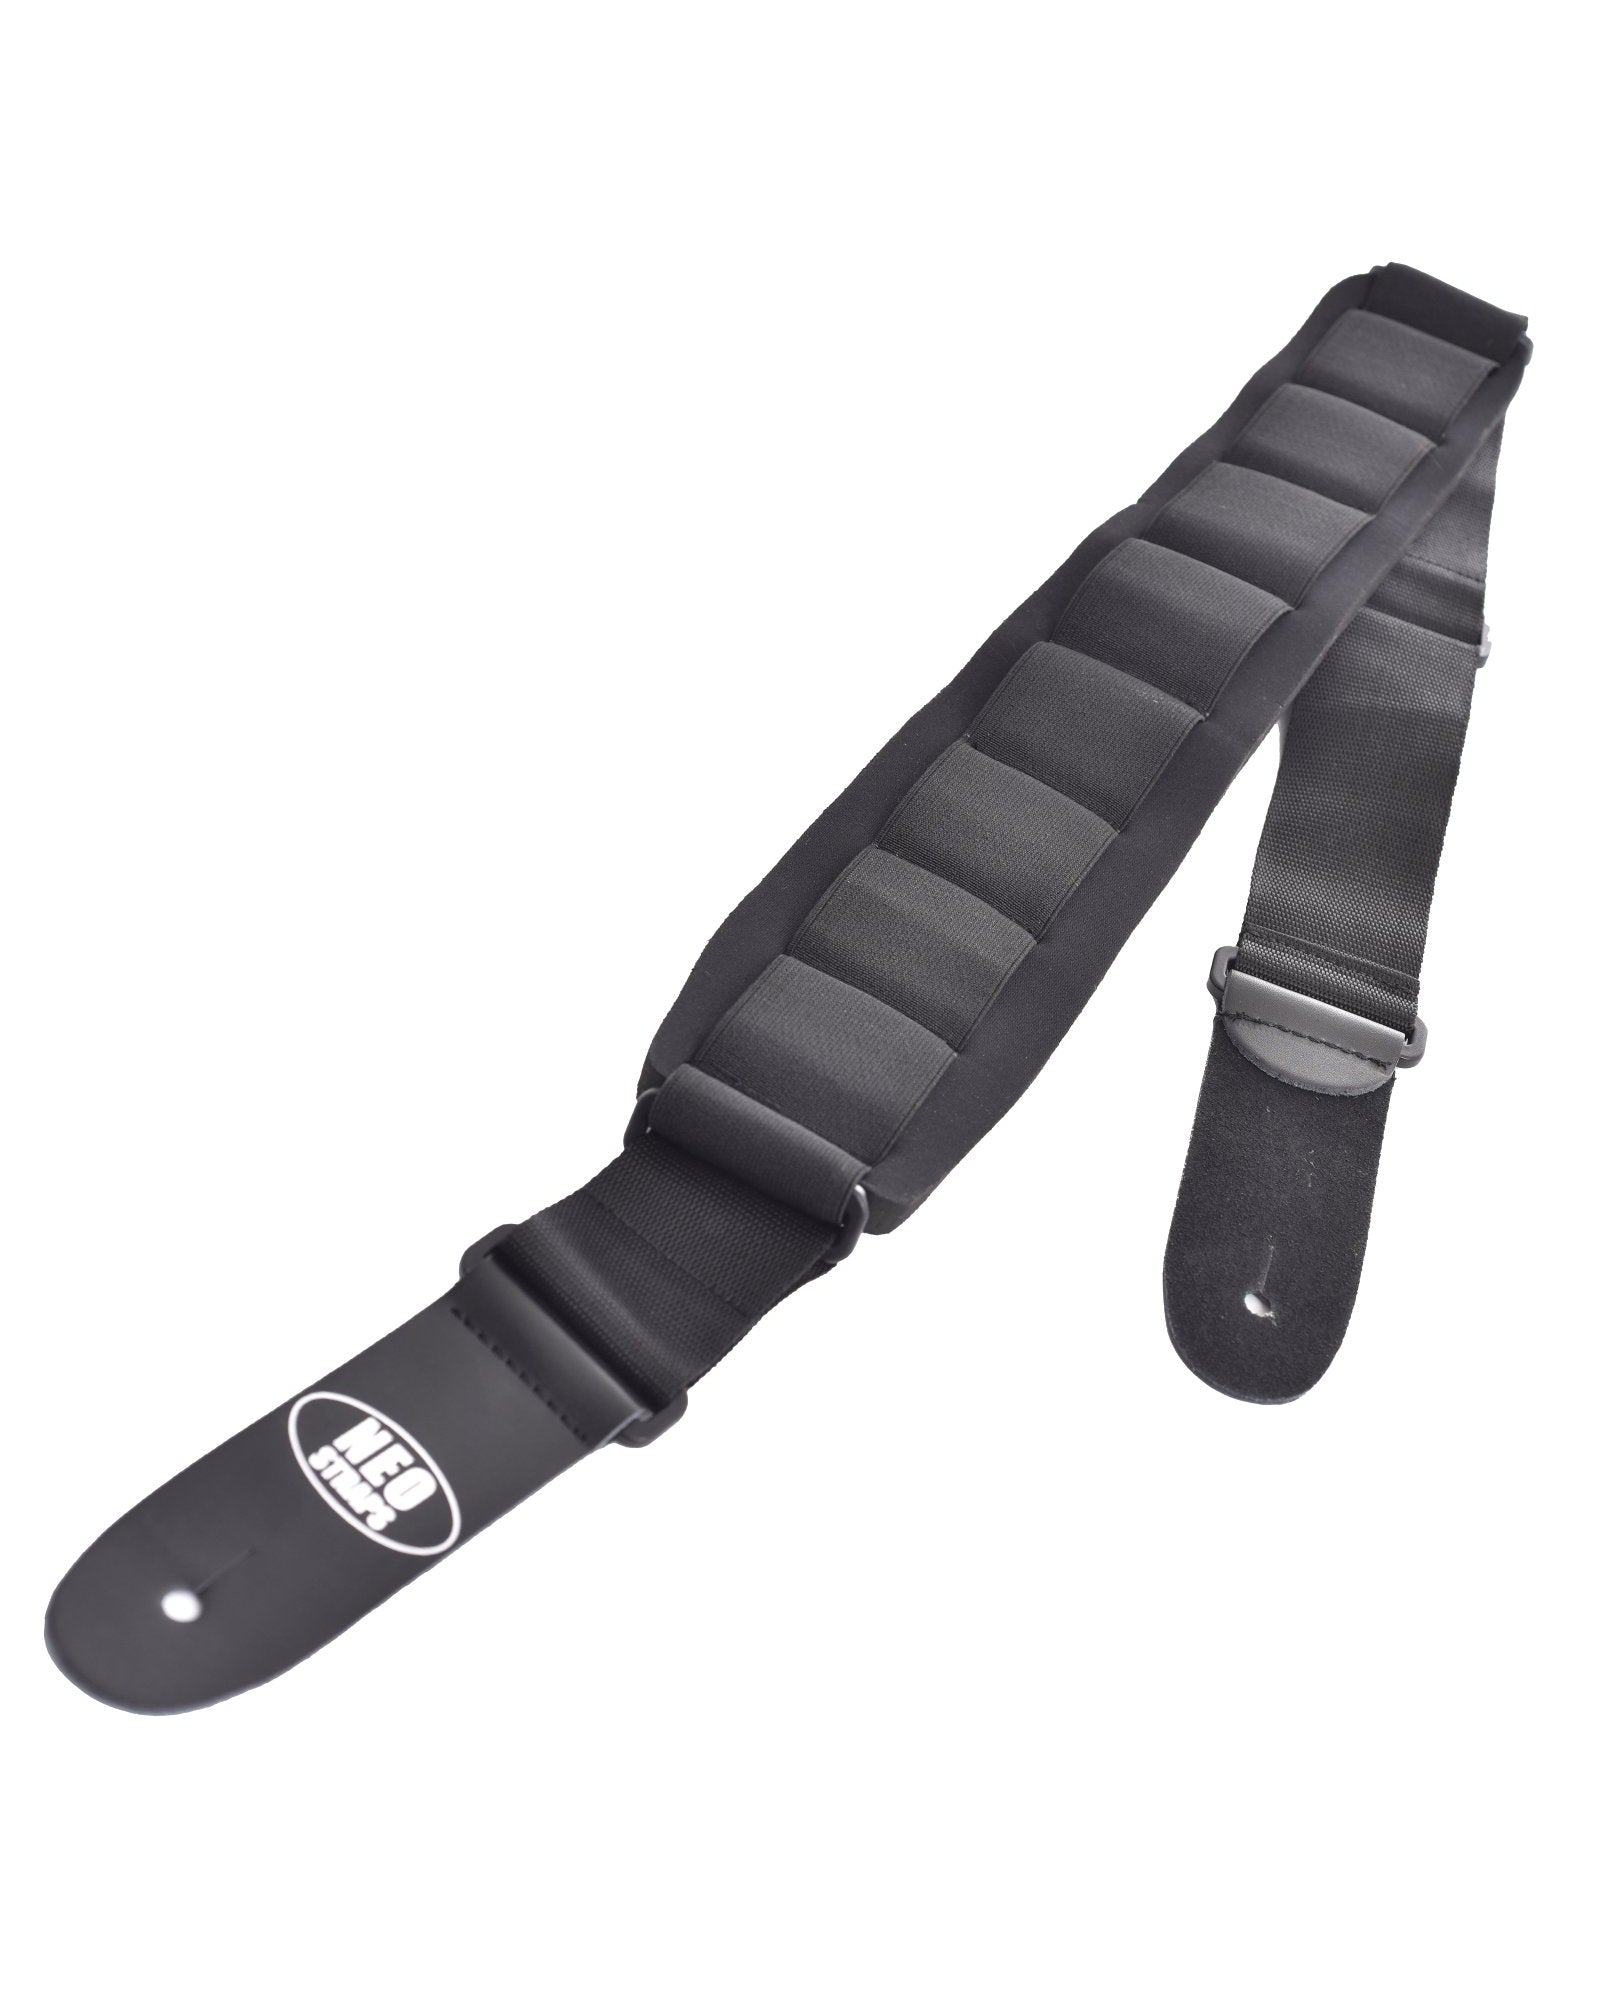 Image 1 of Cool Music Neo Guitar Strap, 3 1/2" - SKU# CMNEO-3 : Product Type Accessories & Parts : Elderly Instruments